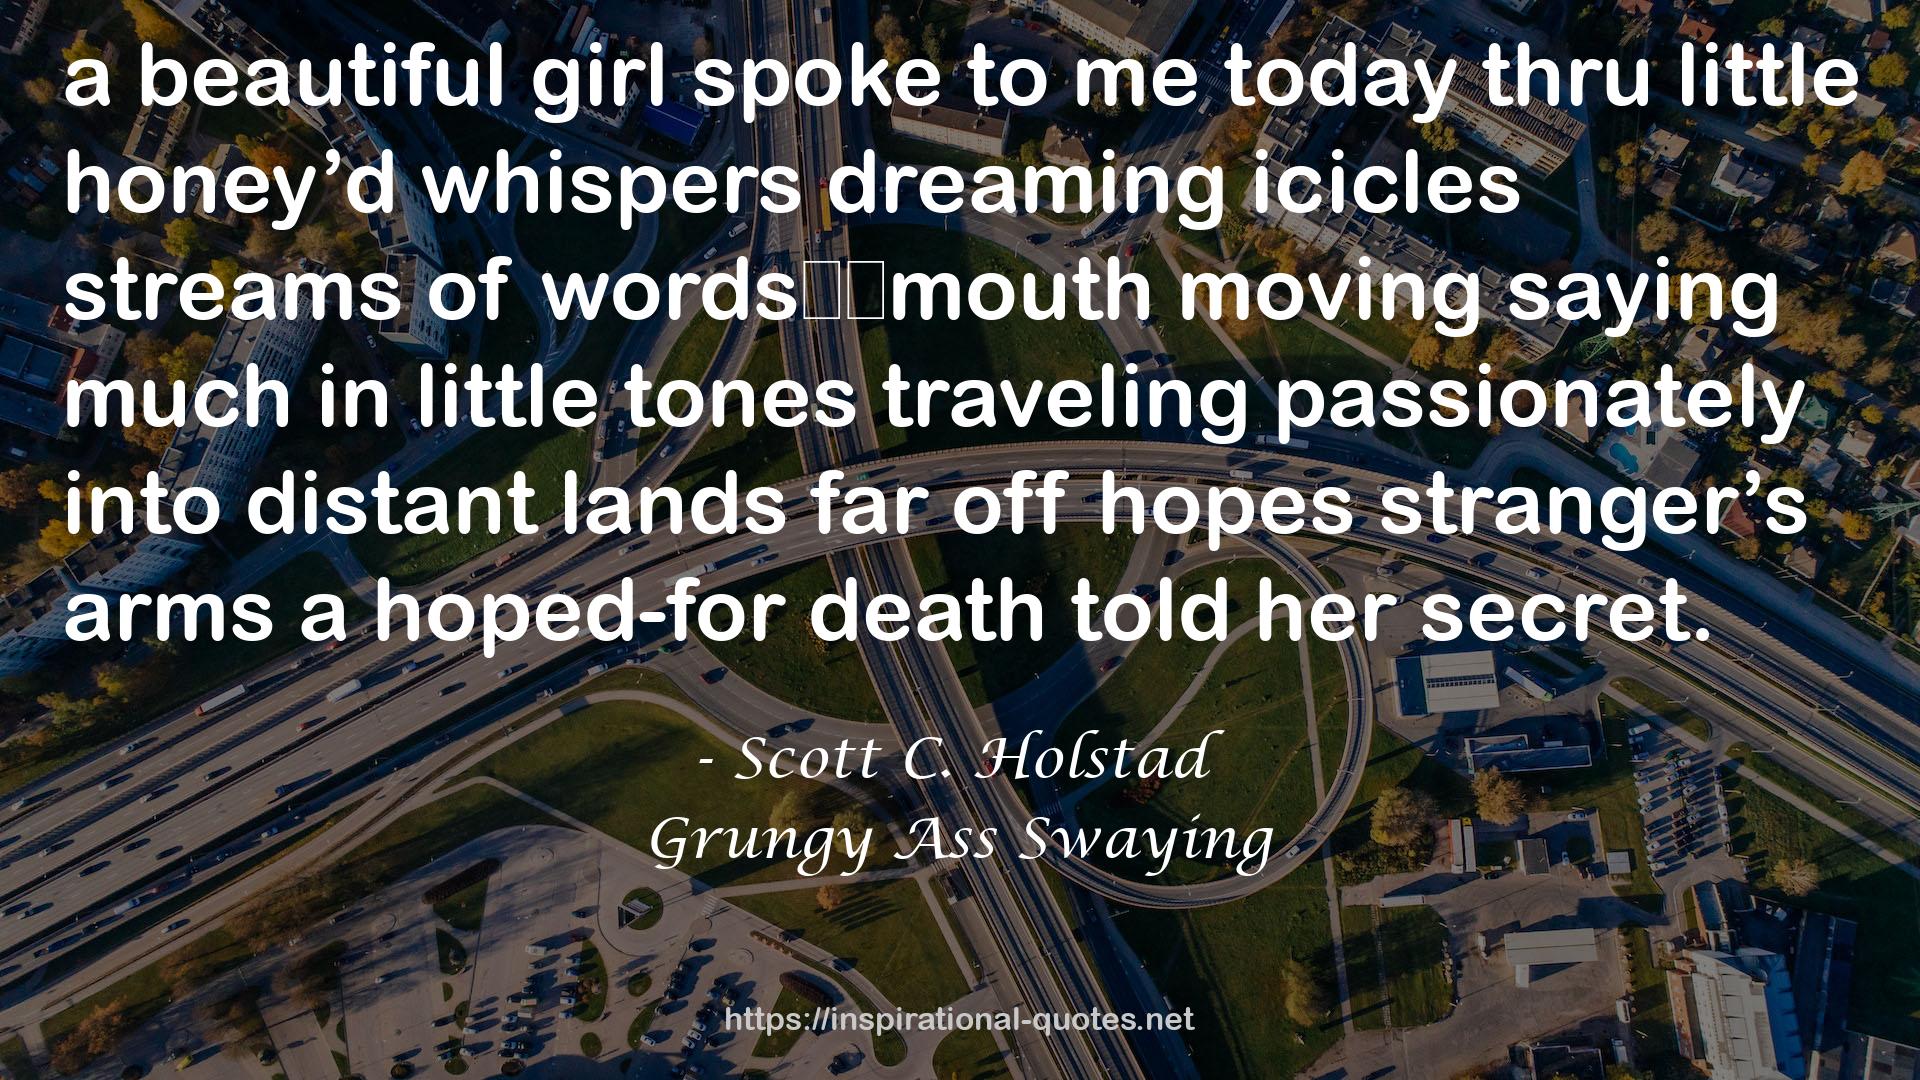 Scott C. Holstad quote : a beautiful girl spoke to me today thru little honey’d whispers dreaming icicles streams of words		mouth moving saying much in little tones traveling passionately into distant lands far off hopes stranger’s arms a hoped-for death told her secret.